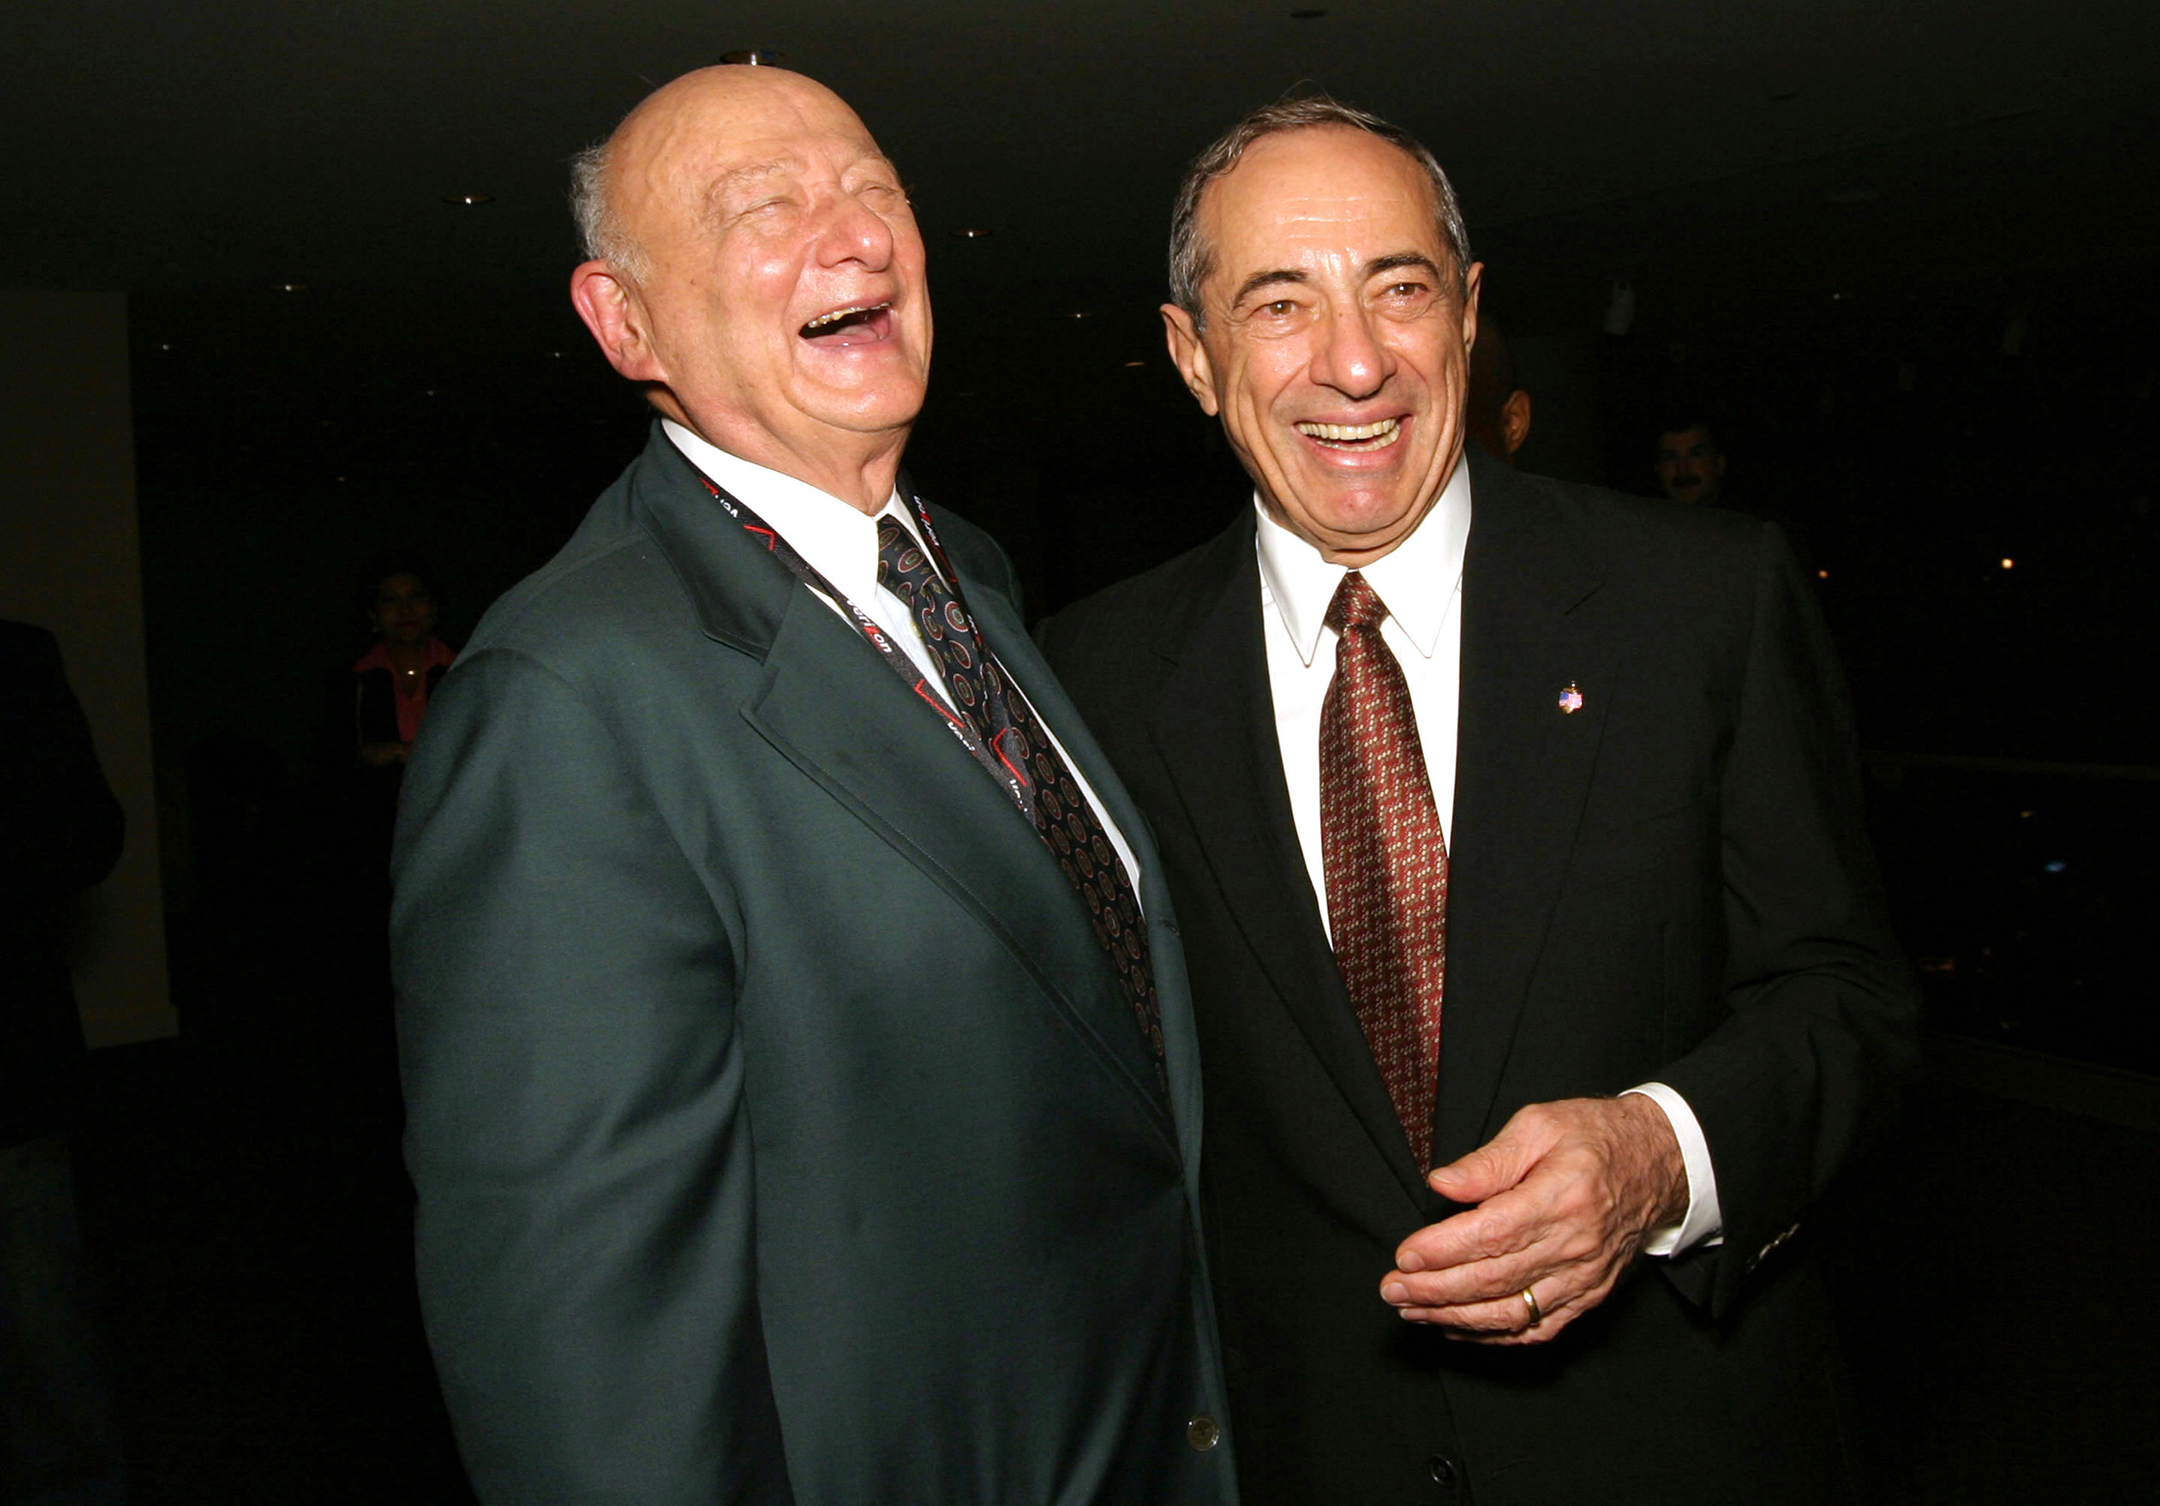 photo of former new york city mayor ed koch (left) laughing as he stands next to a smiling mario cuomo